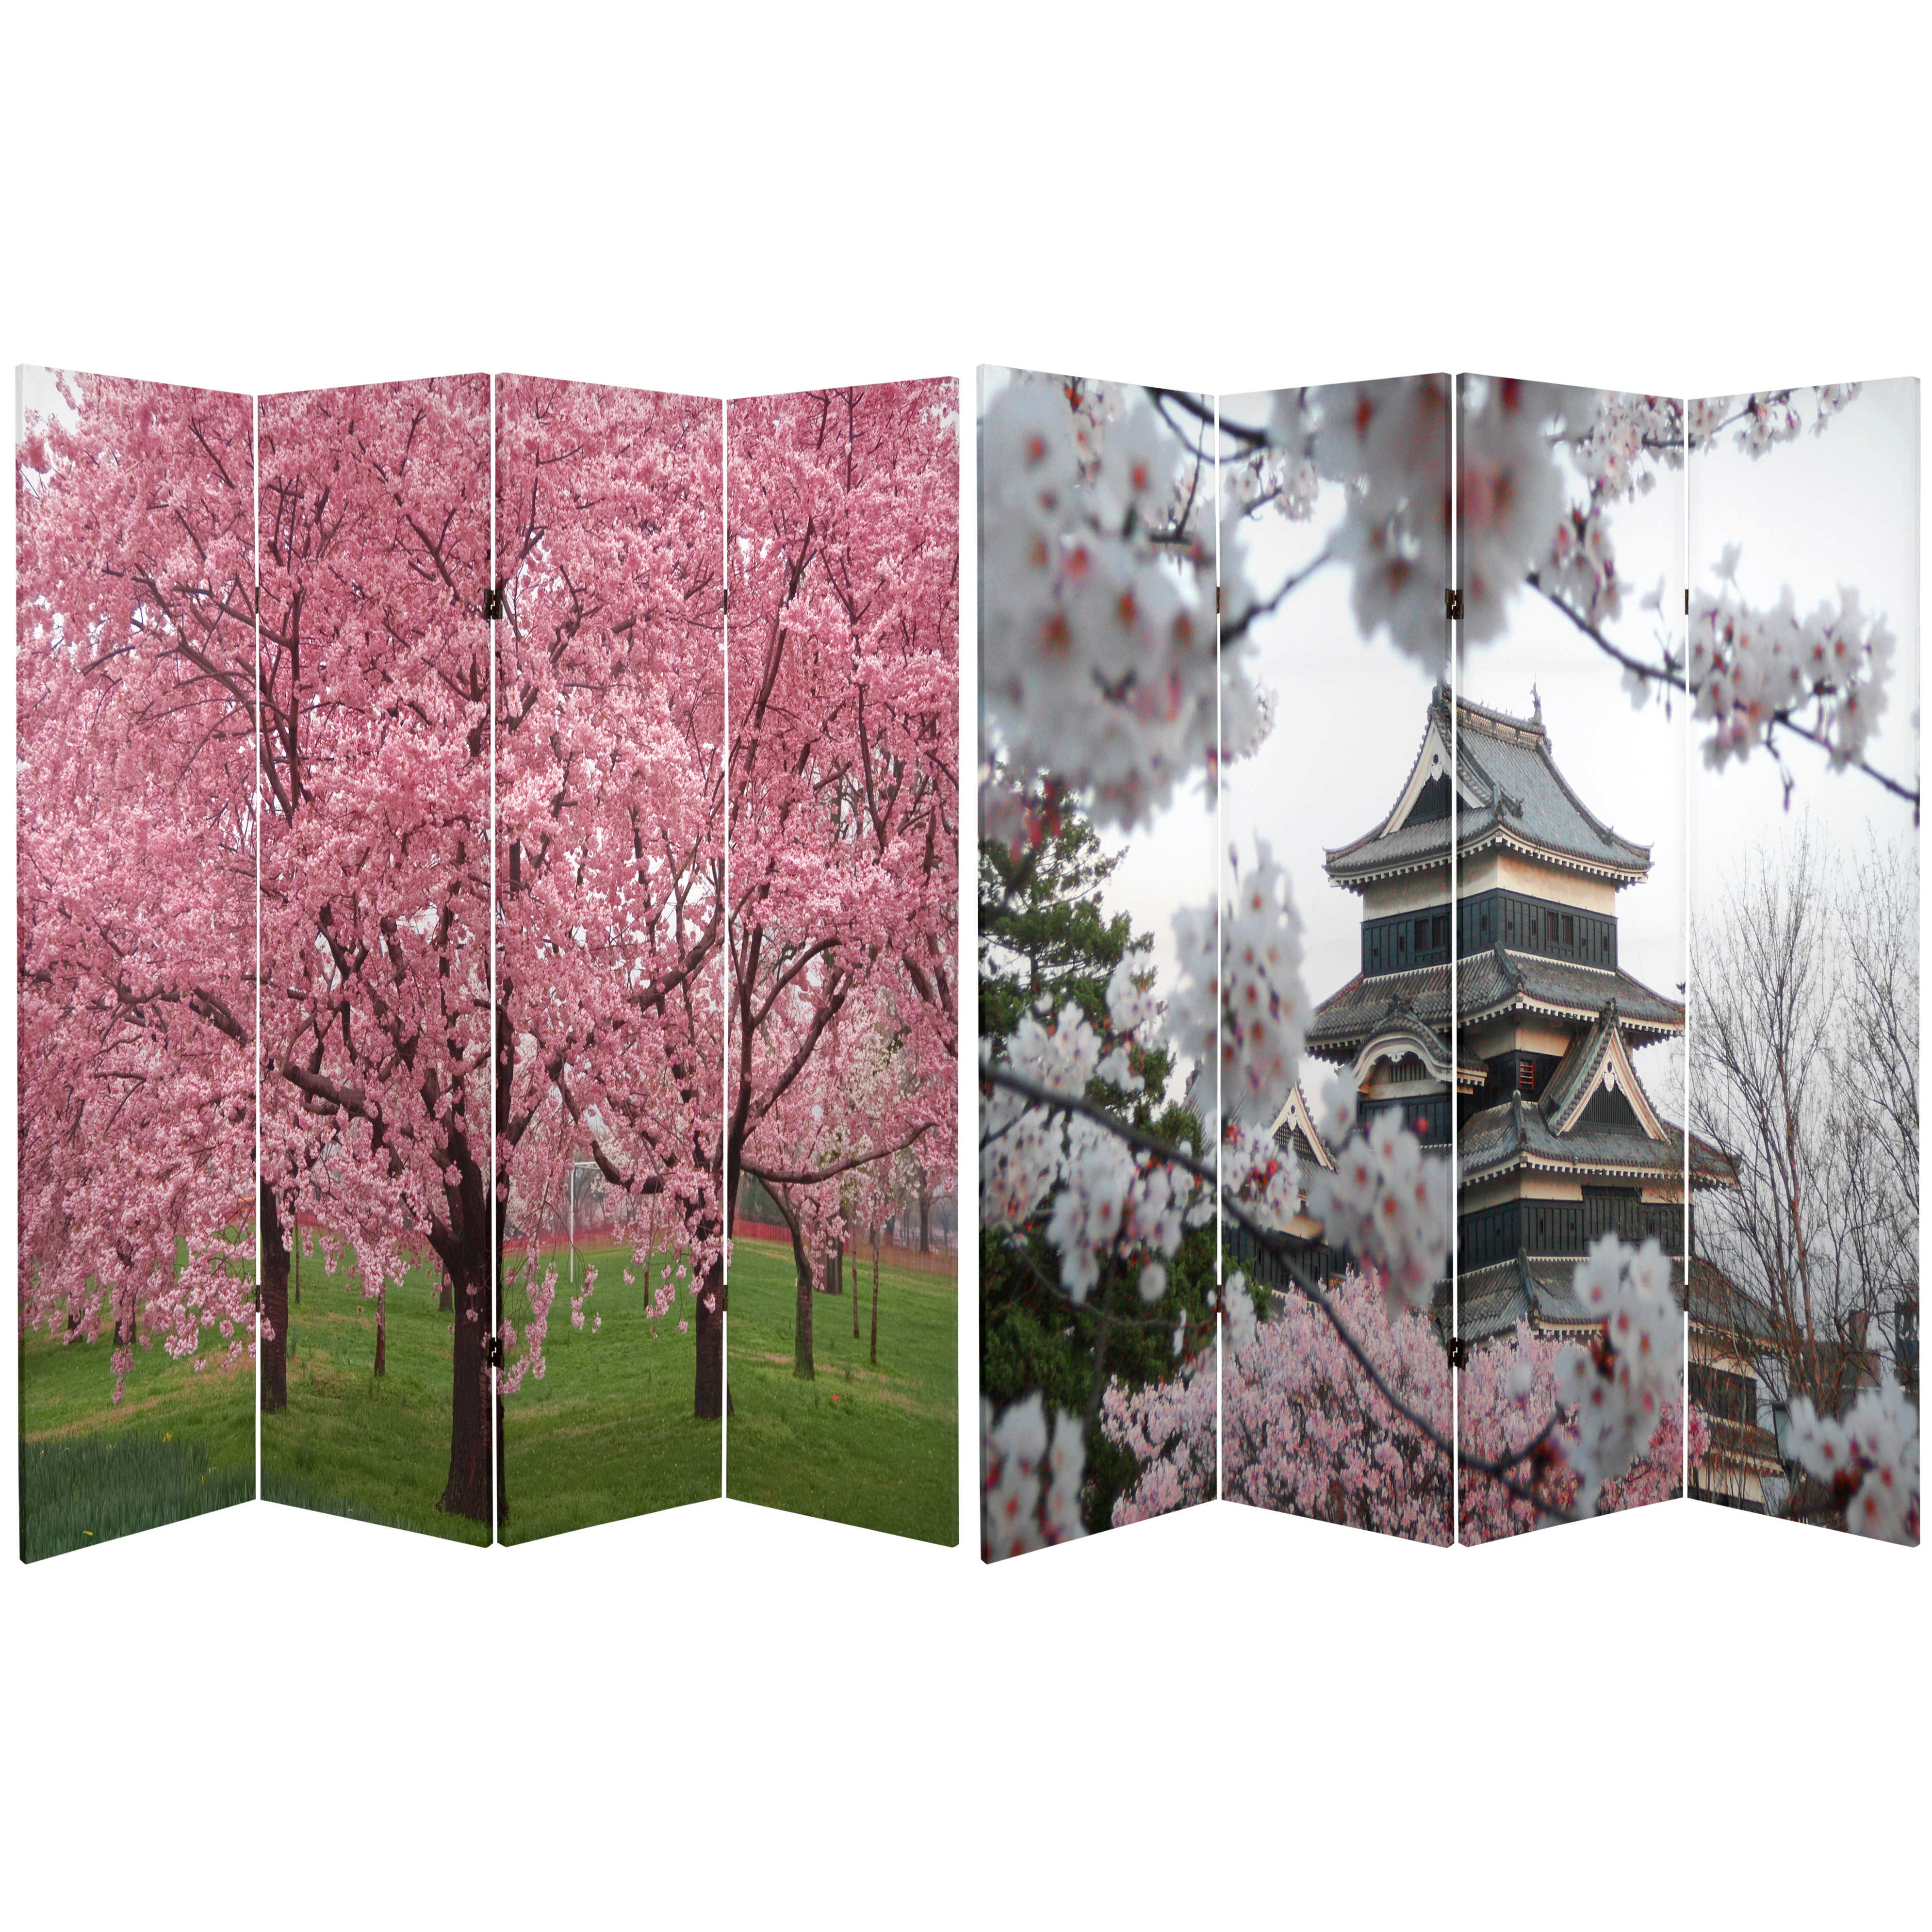 Buy ft. Tall Double Sided Cherry Blossoms Room Divider Online (CAN-CHERRY)  Satisfaction Guaranteed